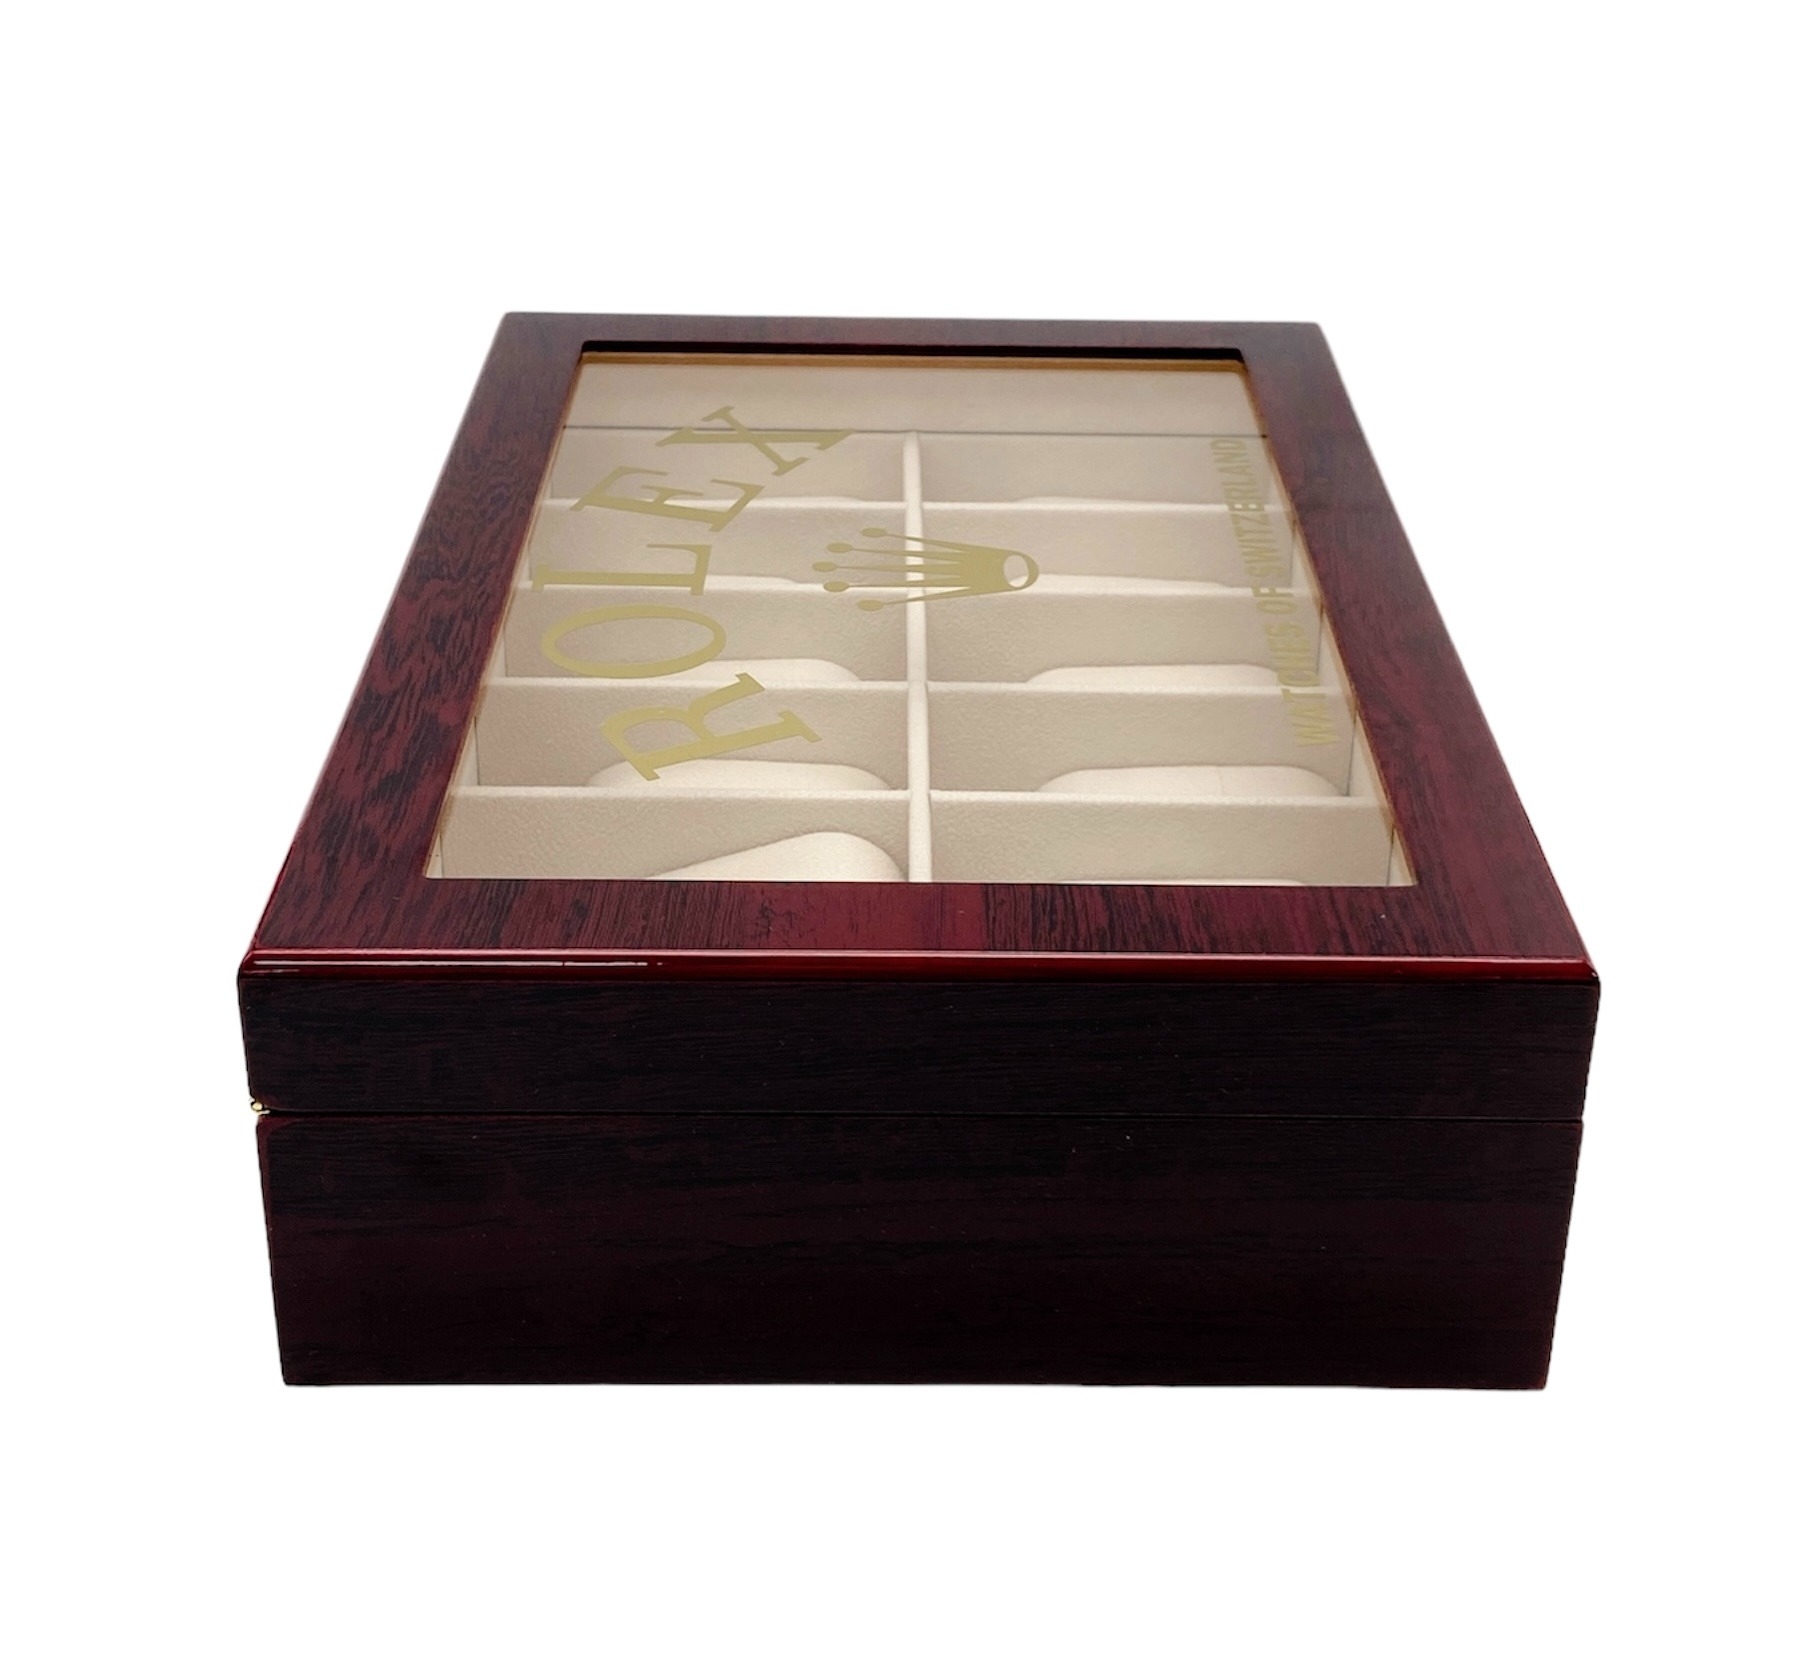 An Unused 12 Watch Display Case. Perfect for Rolex watches. 31.5 x 21.5 x 8.5cm. Rich Piano Finish. - Image 4 of 12